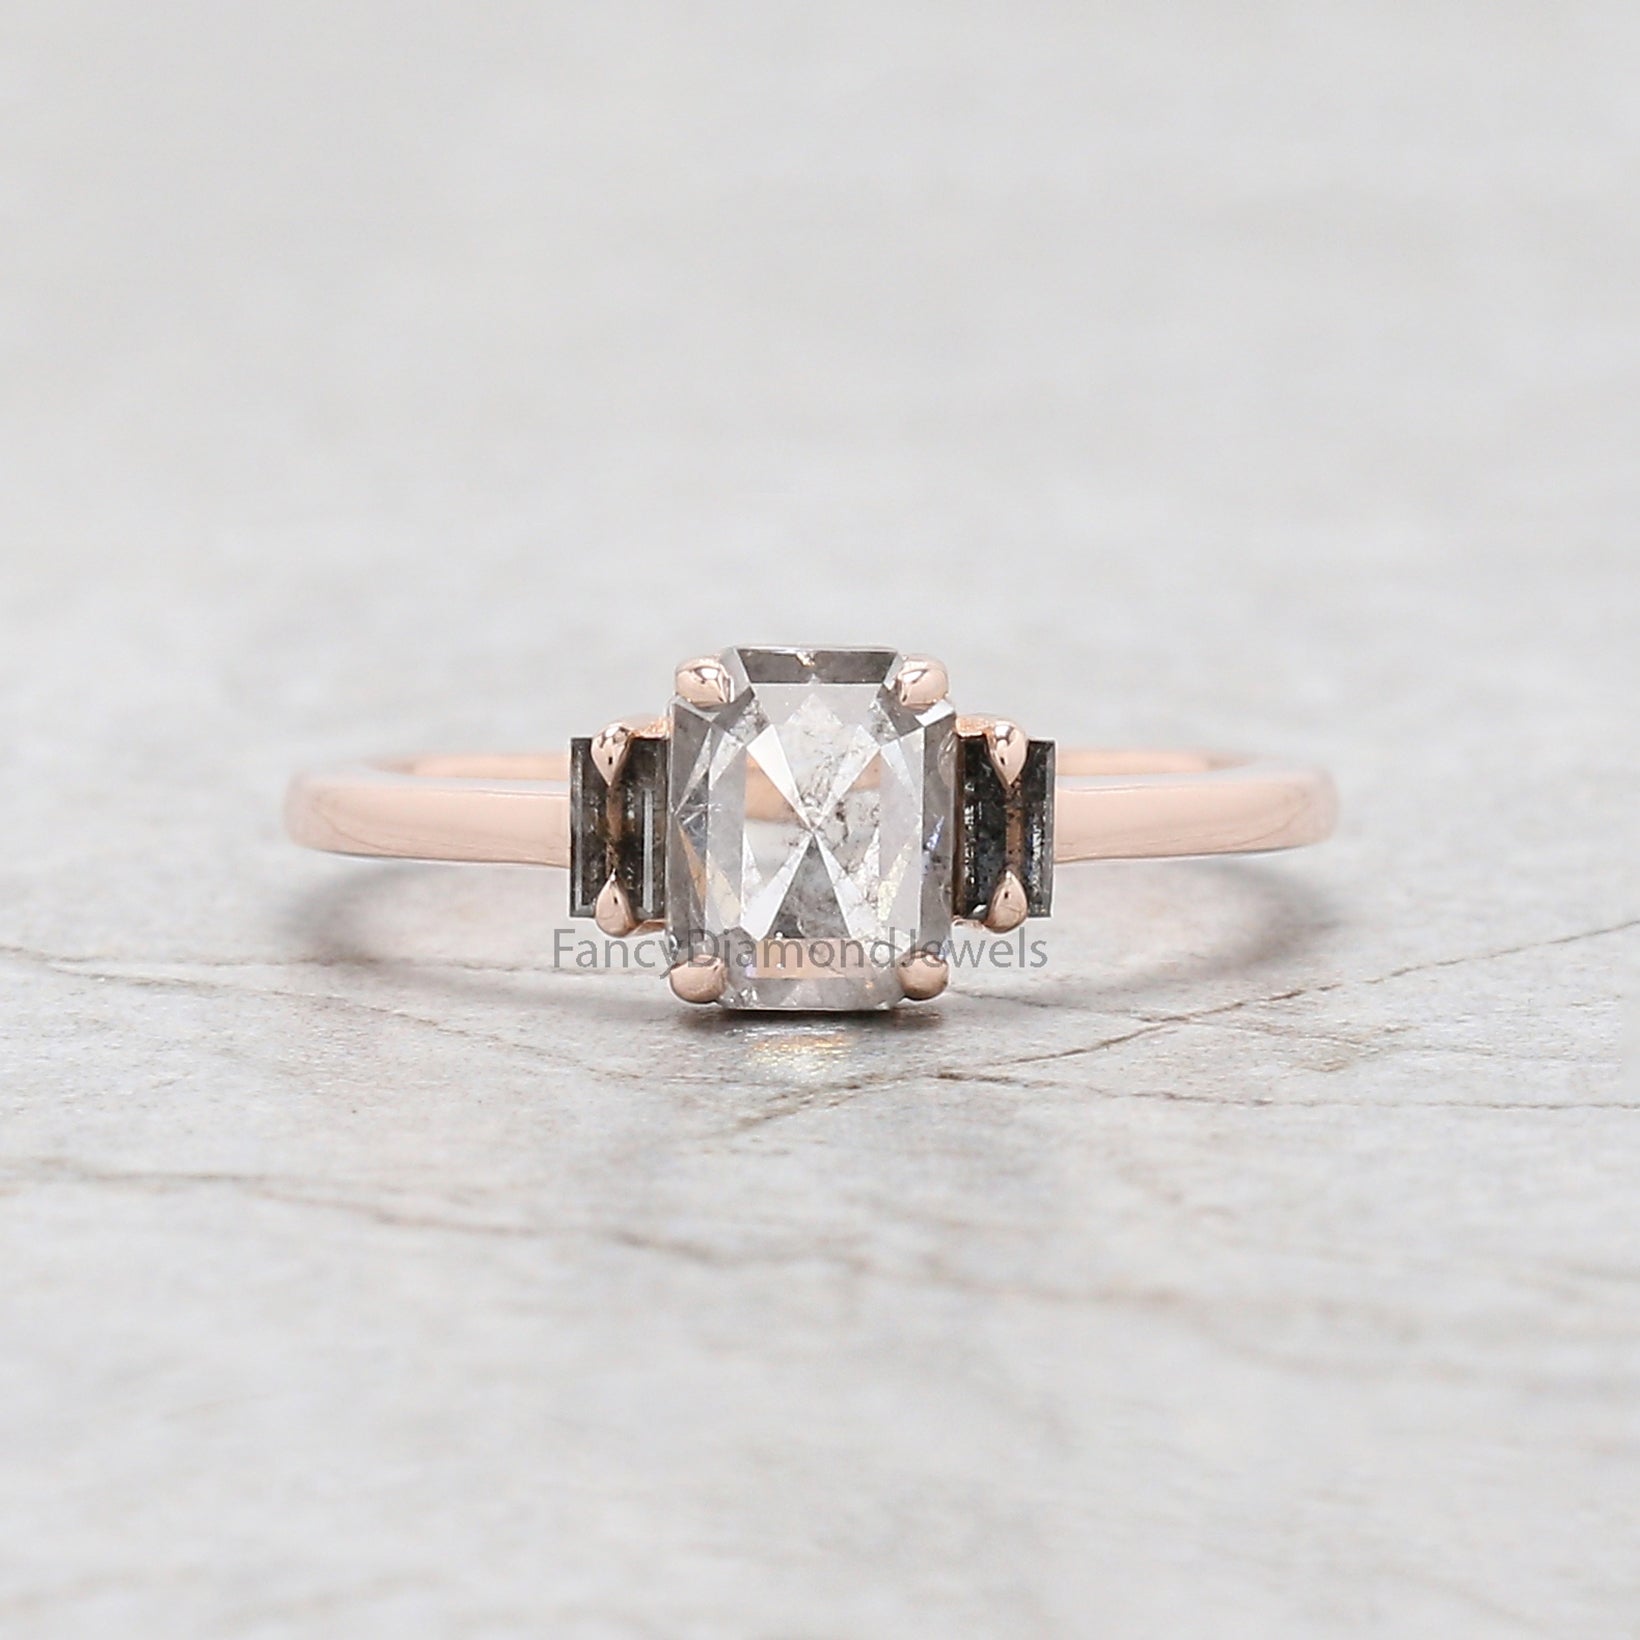 Emerald Cut Salt And Pepper Diamond Ring 0.95 Ct 6.45 MM Emerald Diamond Ring 14K Solid Rose Gold Silver Engagement Ring Gift For Her QL2745